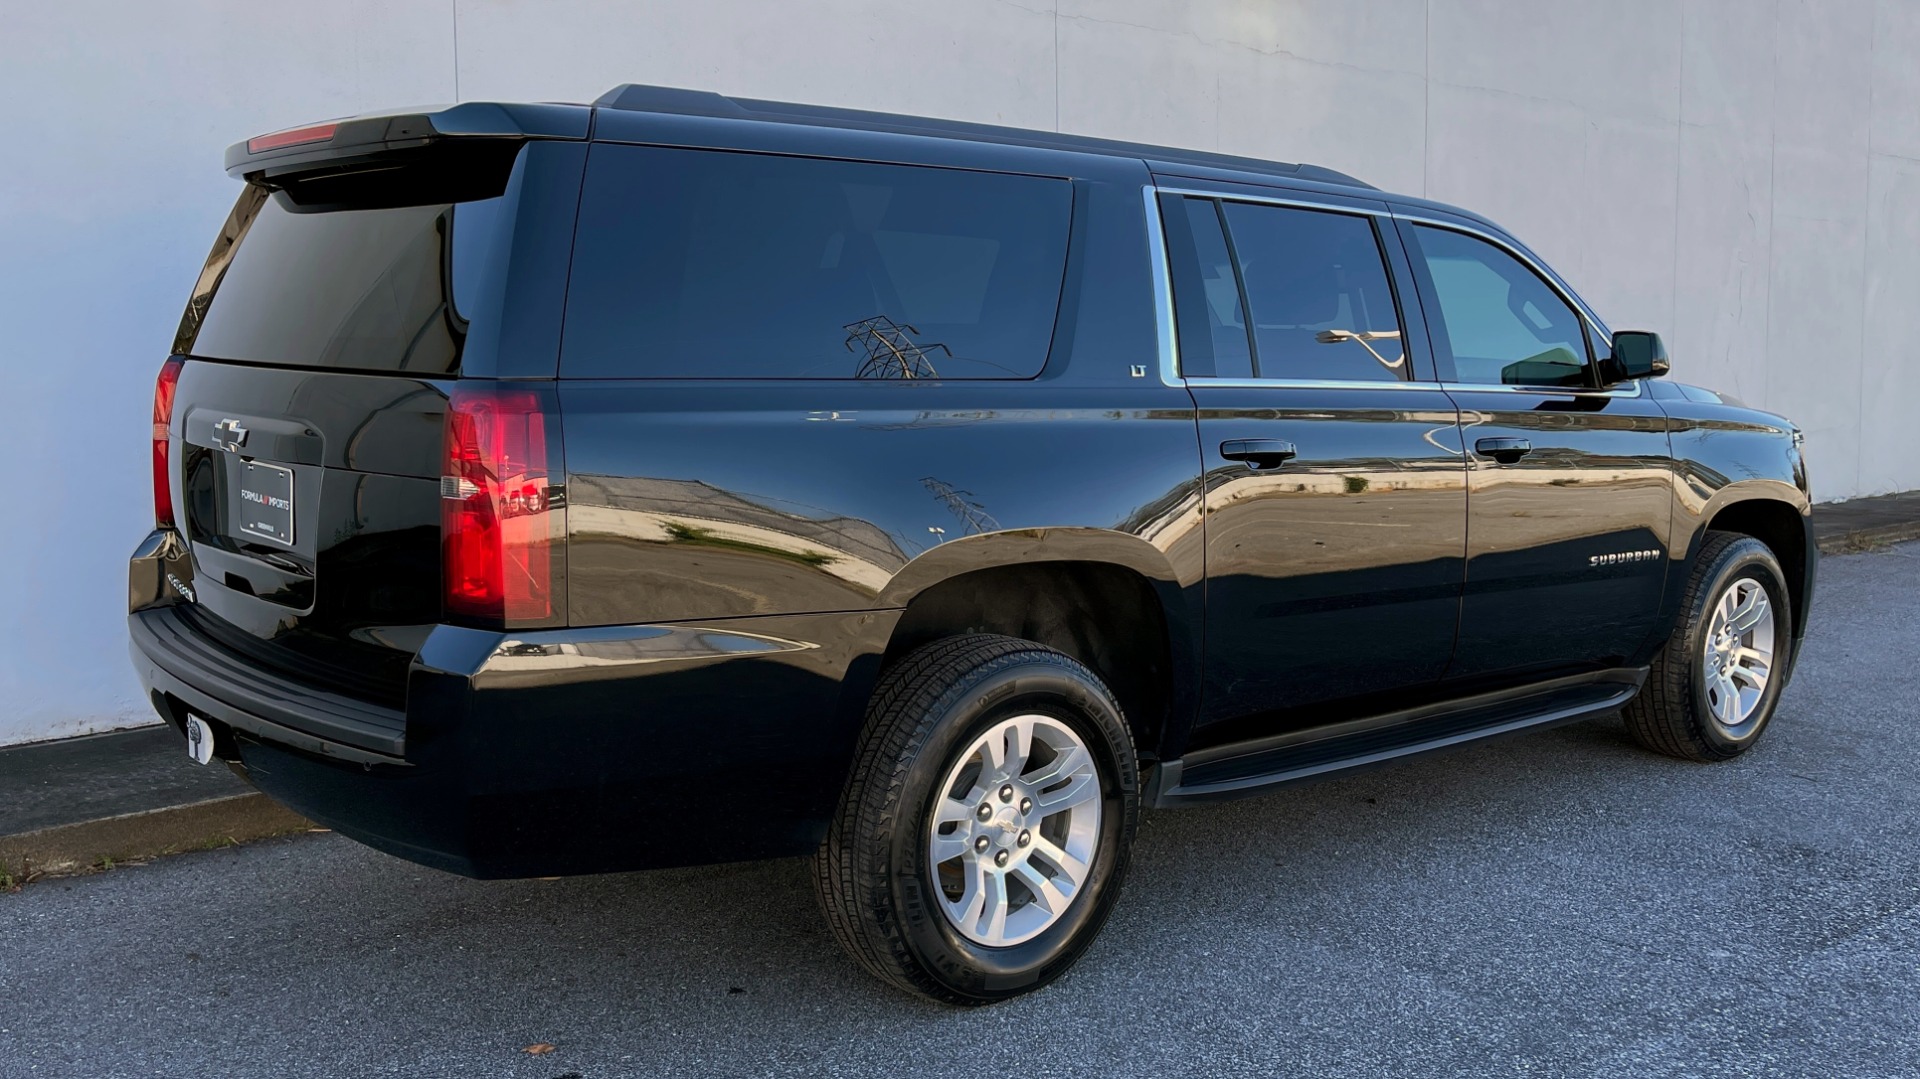 Used 2019 Chevrolet SUBURBAN LT 4X4 / 5.3L V8 / NAV / BOSE / HTD STS / 3-ROW / TOW / REARVIEW for sale $47,995 at Formula Imports in Charlotte NC 28227 5